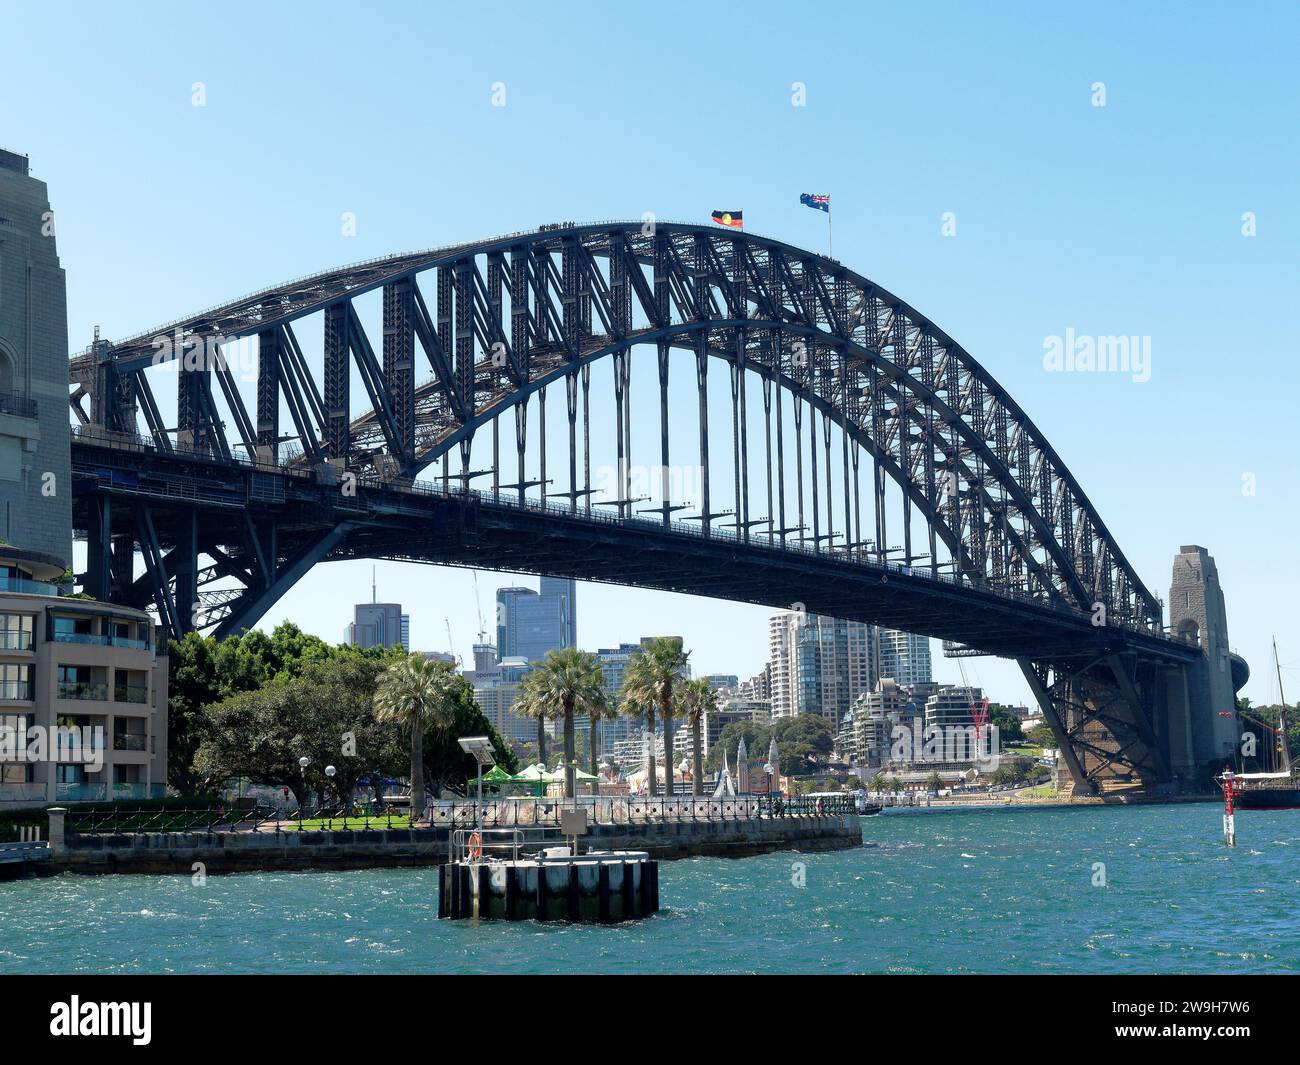 View of the famous Sydney Harbour Bridge spanning the harbour with North Sydney in the background Stock Photo